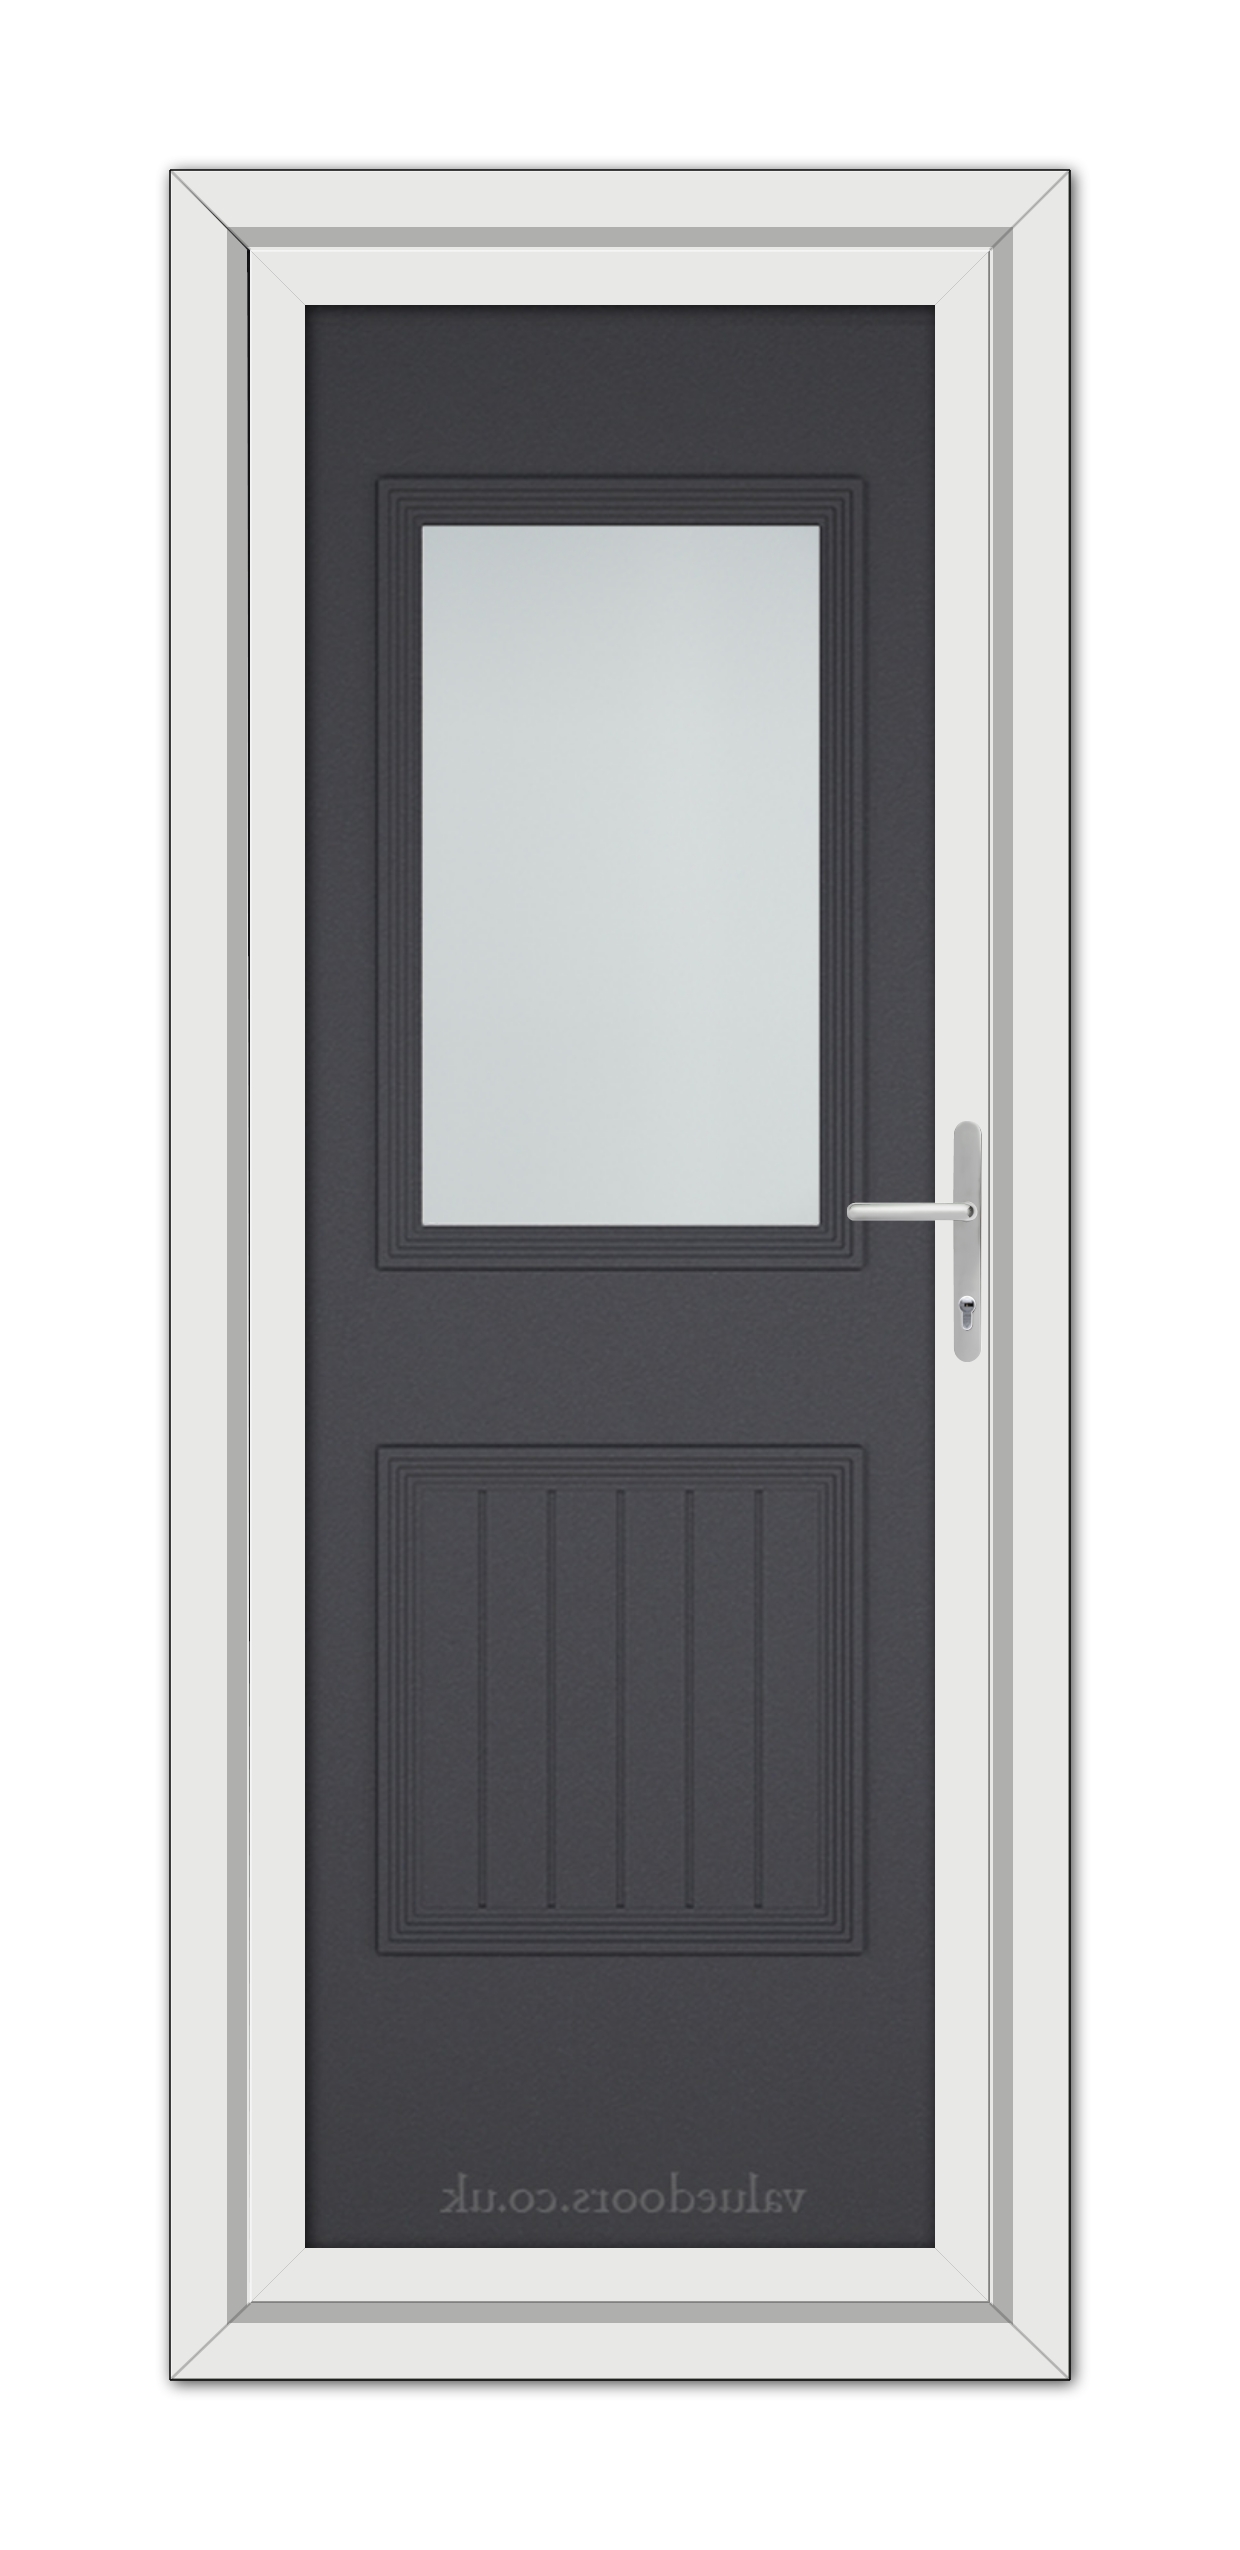 A modern Grey Grained Alnwick One uPVC door with a vertical rectangular window, a silver handle, set within a white door frame.